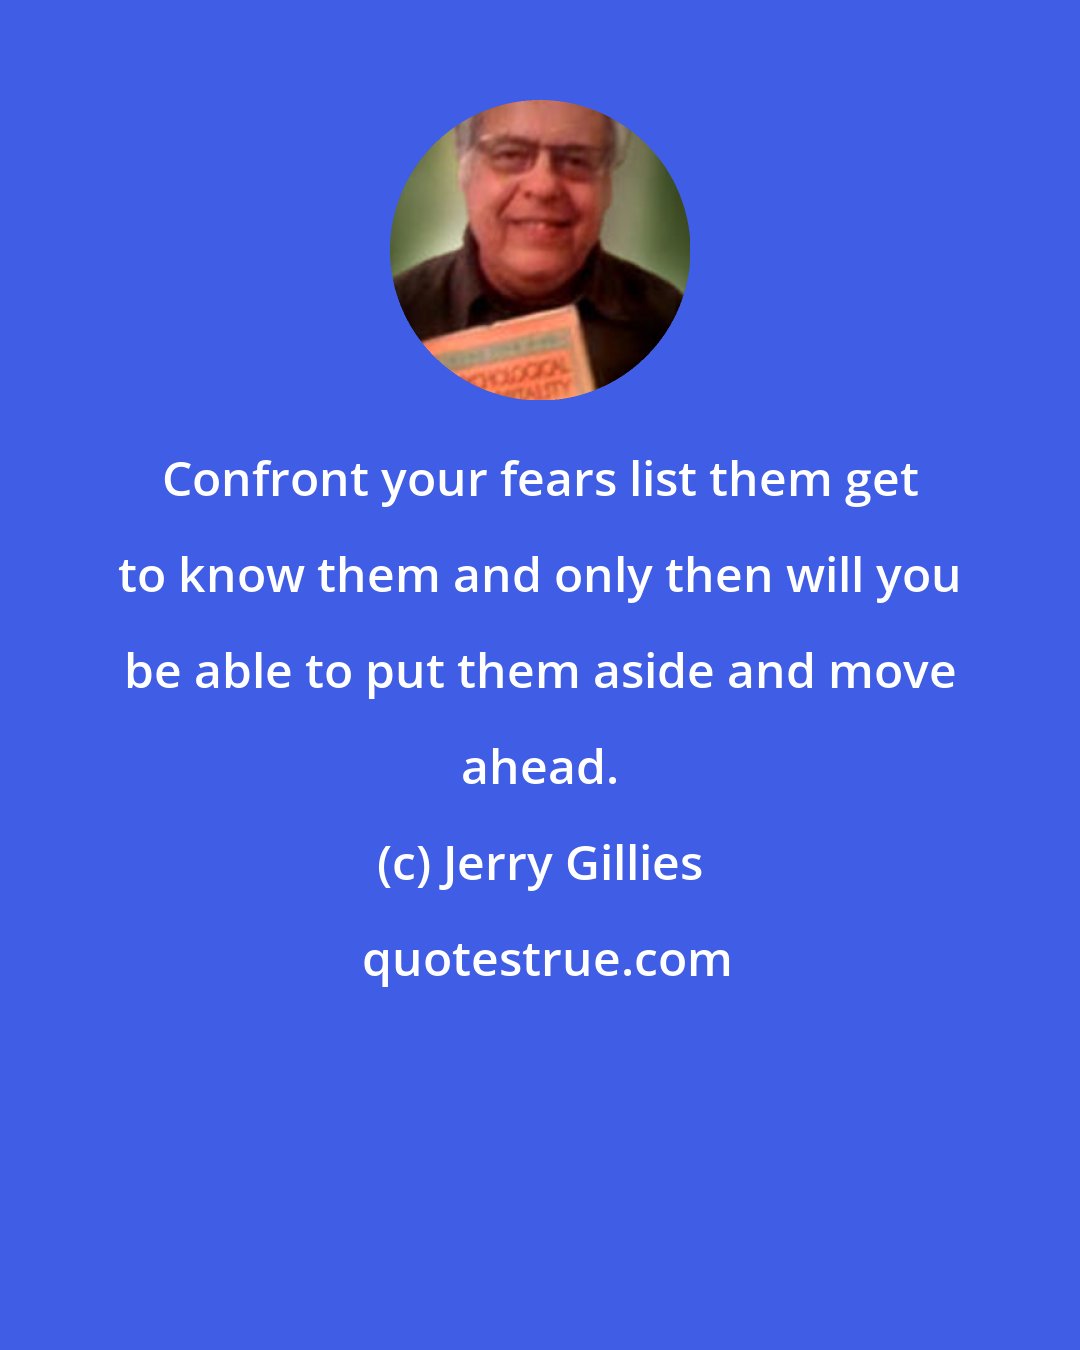 Jerry Gillies: Confront your fears list them get to know them and only then will you be able to put them aside and move ahead.